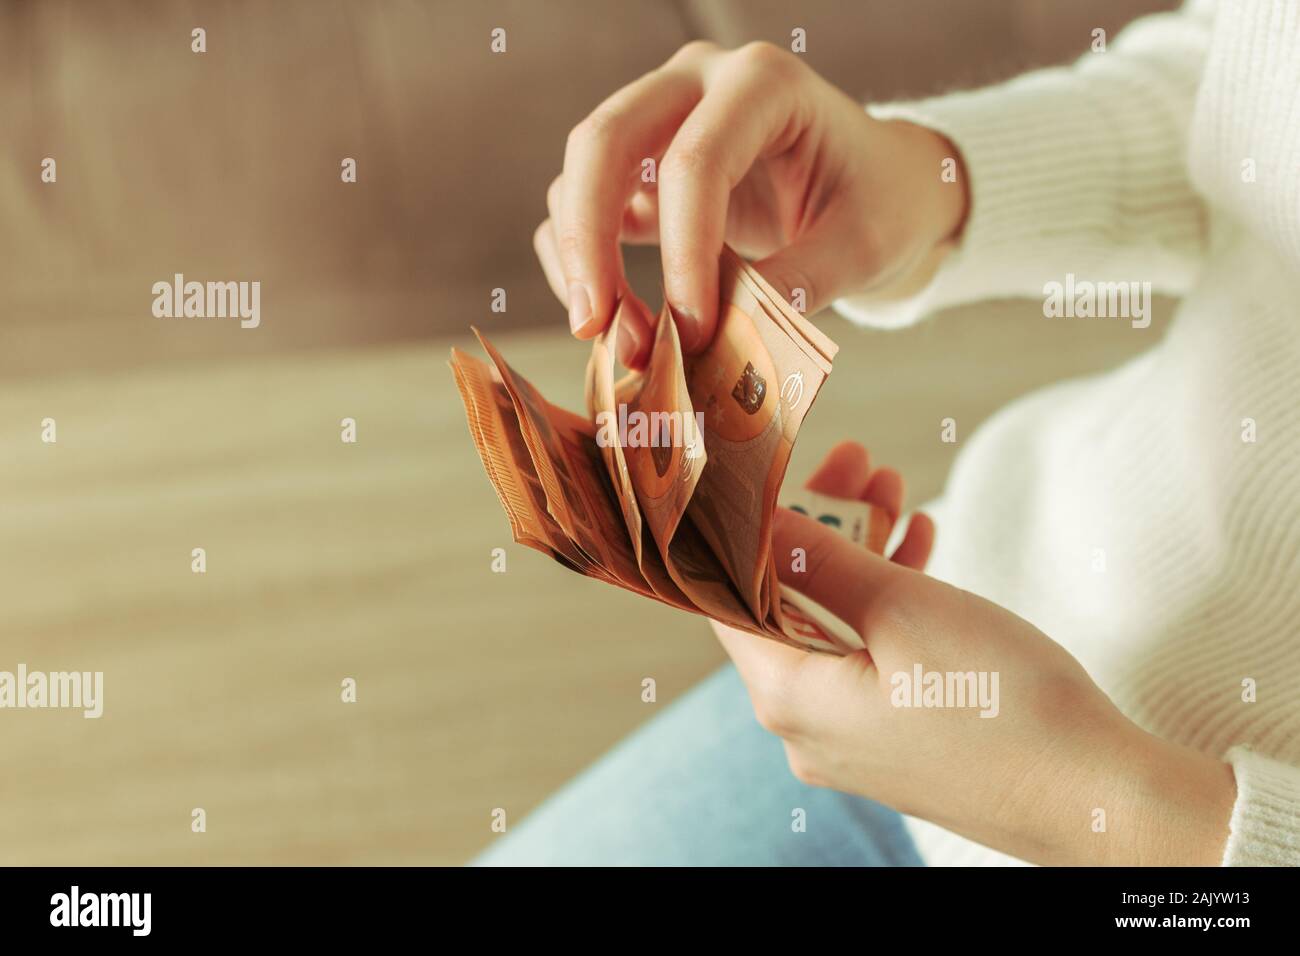 Stock photo of a woman's hands counting 50 euro bills Stock Photo